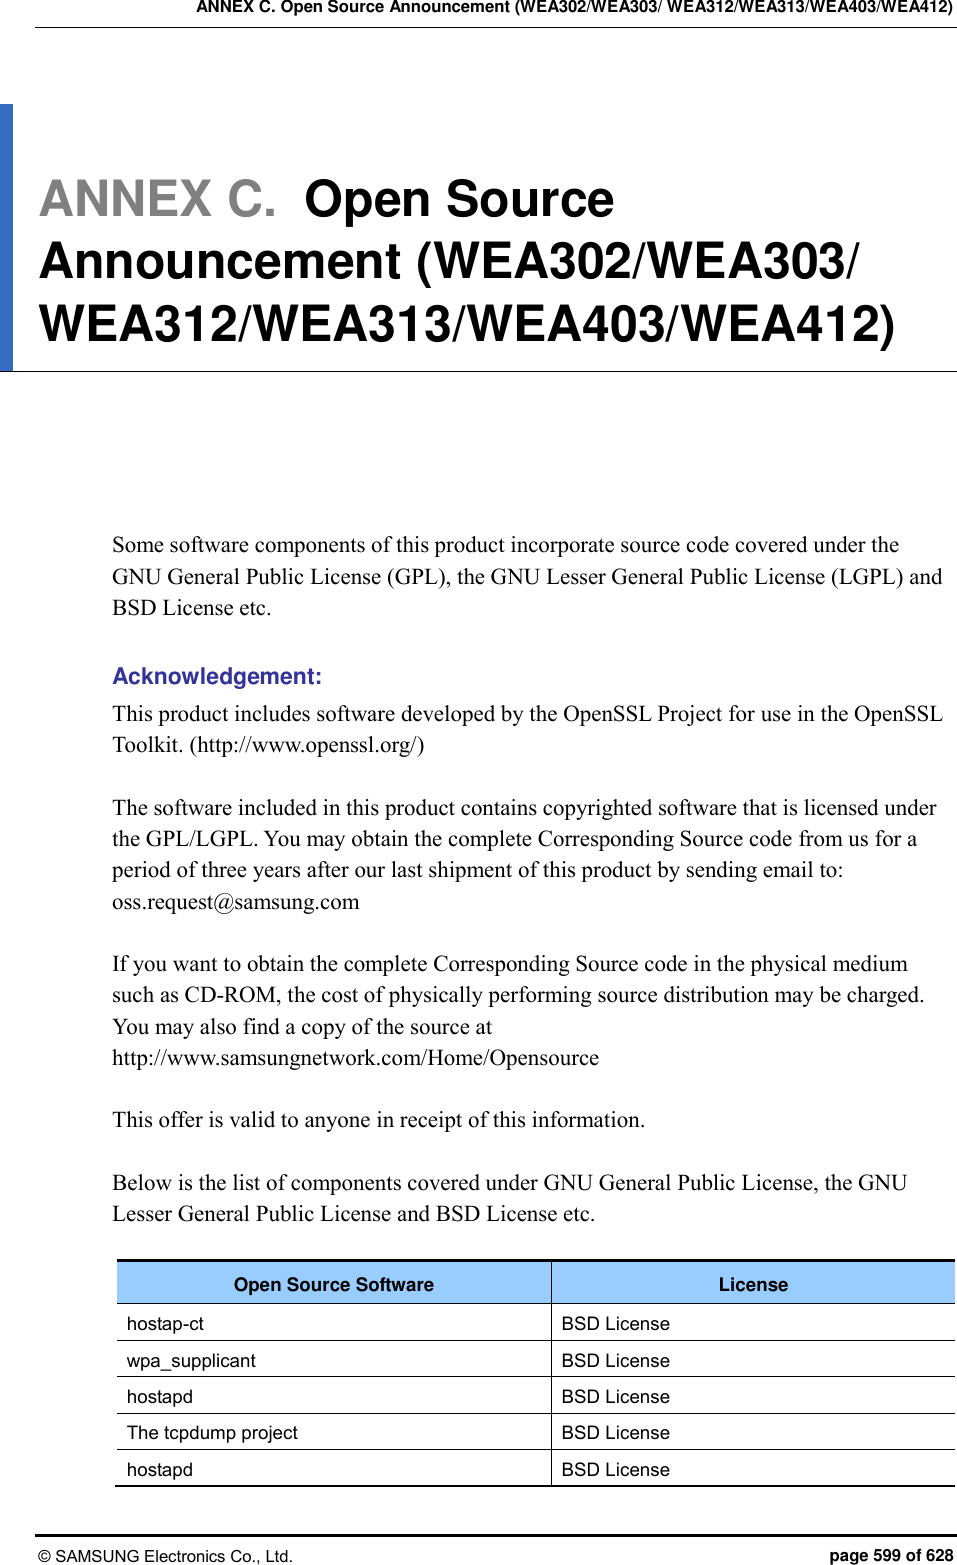 ANNEX C. Open Source Announcement (WEA302/WEA303/ WEA312/WEA313/WEA403/WEA412) © SAMSUNG Electronics Co., Ltd.  page 599 of 628 ANNEX C.  Open Source Announcement (WEA302/WEA303/ WEA312/WEA313/WEA403/WEA412)      Some software components of this product incorporate source code covered under the GNU General Public License (GPL), the GNU Lesser General Public License (LGPL) and BSD License etc.  Acknowledgement: This product includes software developed by the OpenSSL Project for use in the OpenSSL Toolkit. (http://www.openssl.org/)    The software included in this product contains copyrighted software that is licensed under the GPL/LGPL. You may obtain the complete Corresponding Source code from us for a period of three years after our last shipment of this product by sending email to: oss.request@samsung.com  If you want to obtain the complete Corresponding Source code in the physical medium such as CD-ROM, the cost of physically performing source distribution may be charged. You may also find a copy of the source at http://www.samsungnetwork.com/Home/Opensource    This offer is valid to anyone in receipt of this information.  Below is the list of components covered under GNU General Public License, the GNU Lesser General Public License and BSD License etc.  Open Source Software License hostap-ct BSD License wpa_supplicant BSD License hostapd BSD License The tcpdump project BSD License hostapd BSD License 